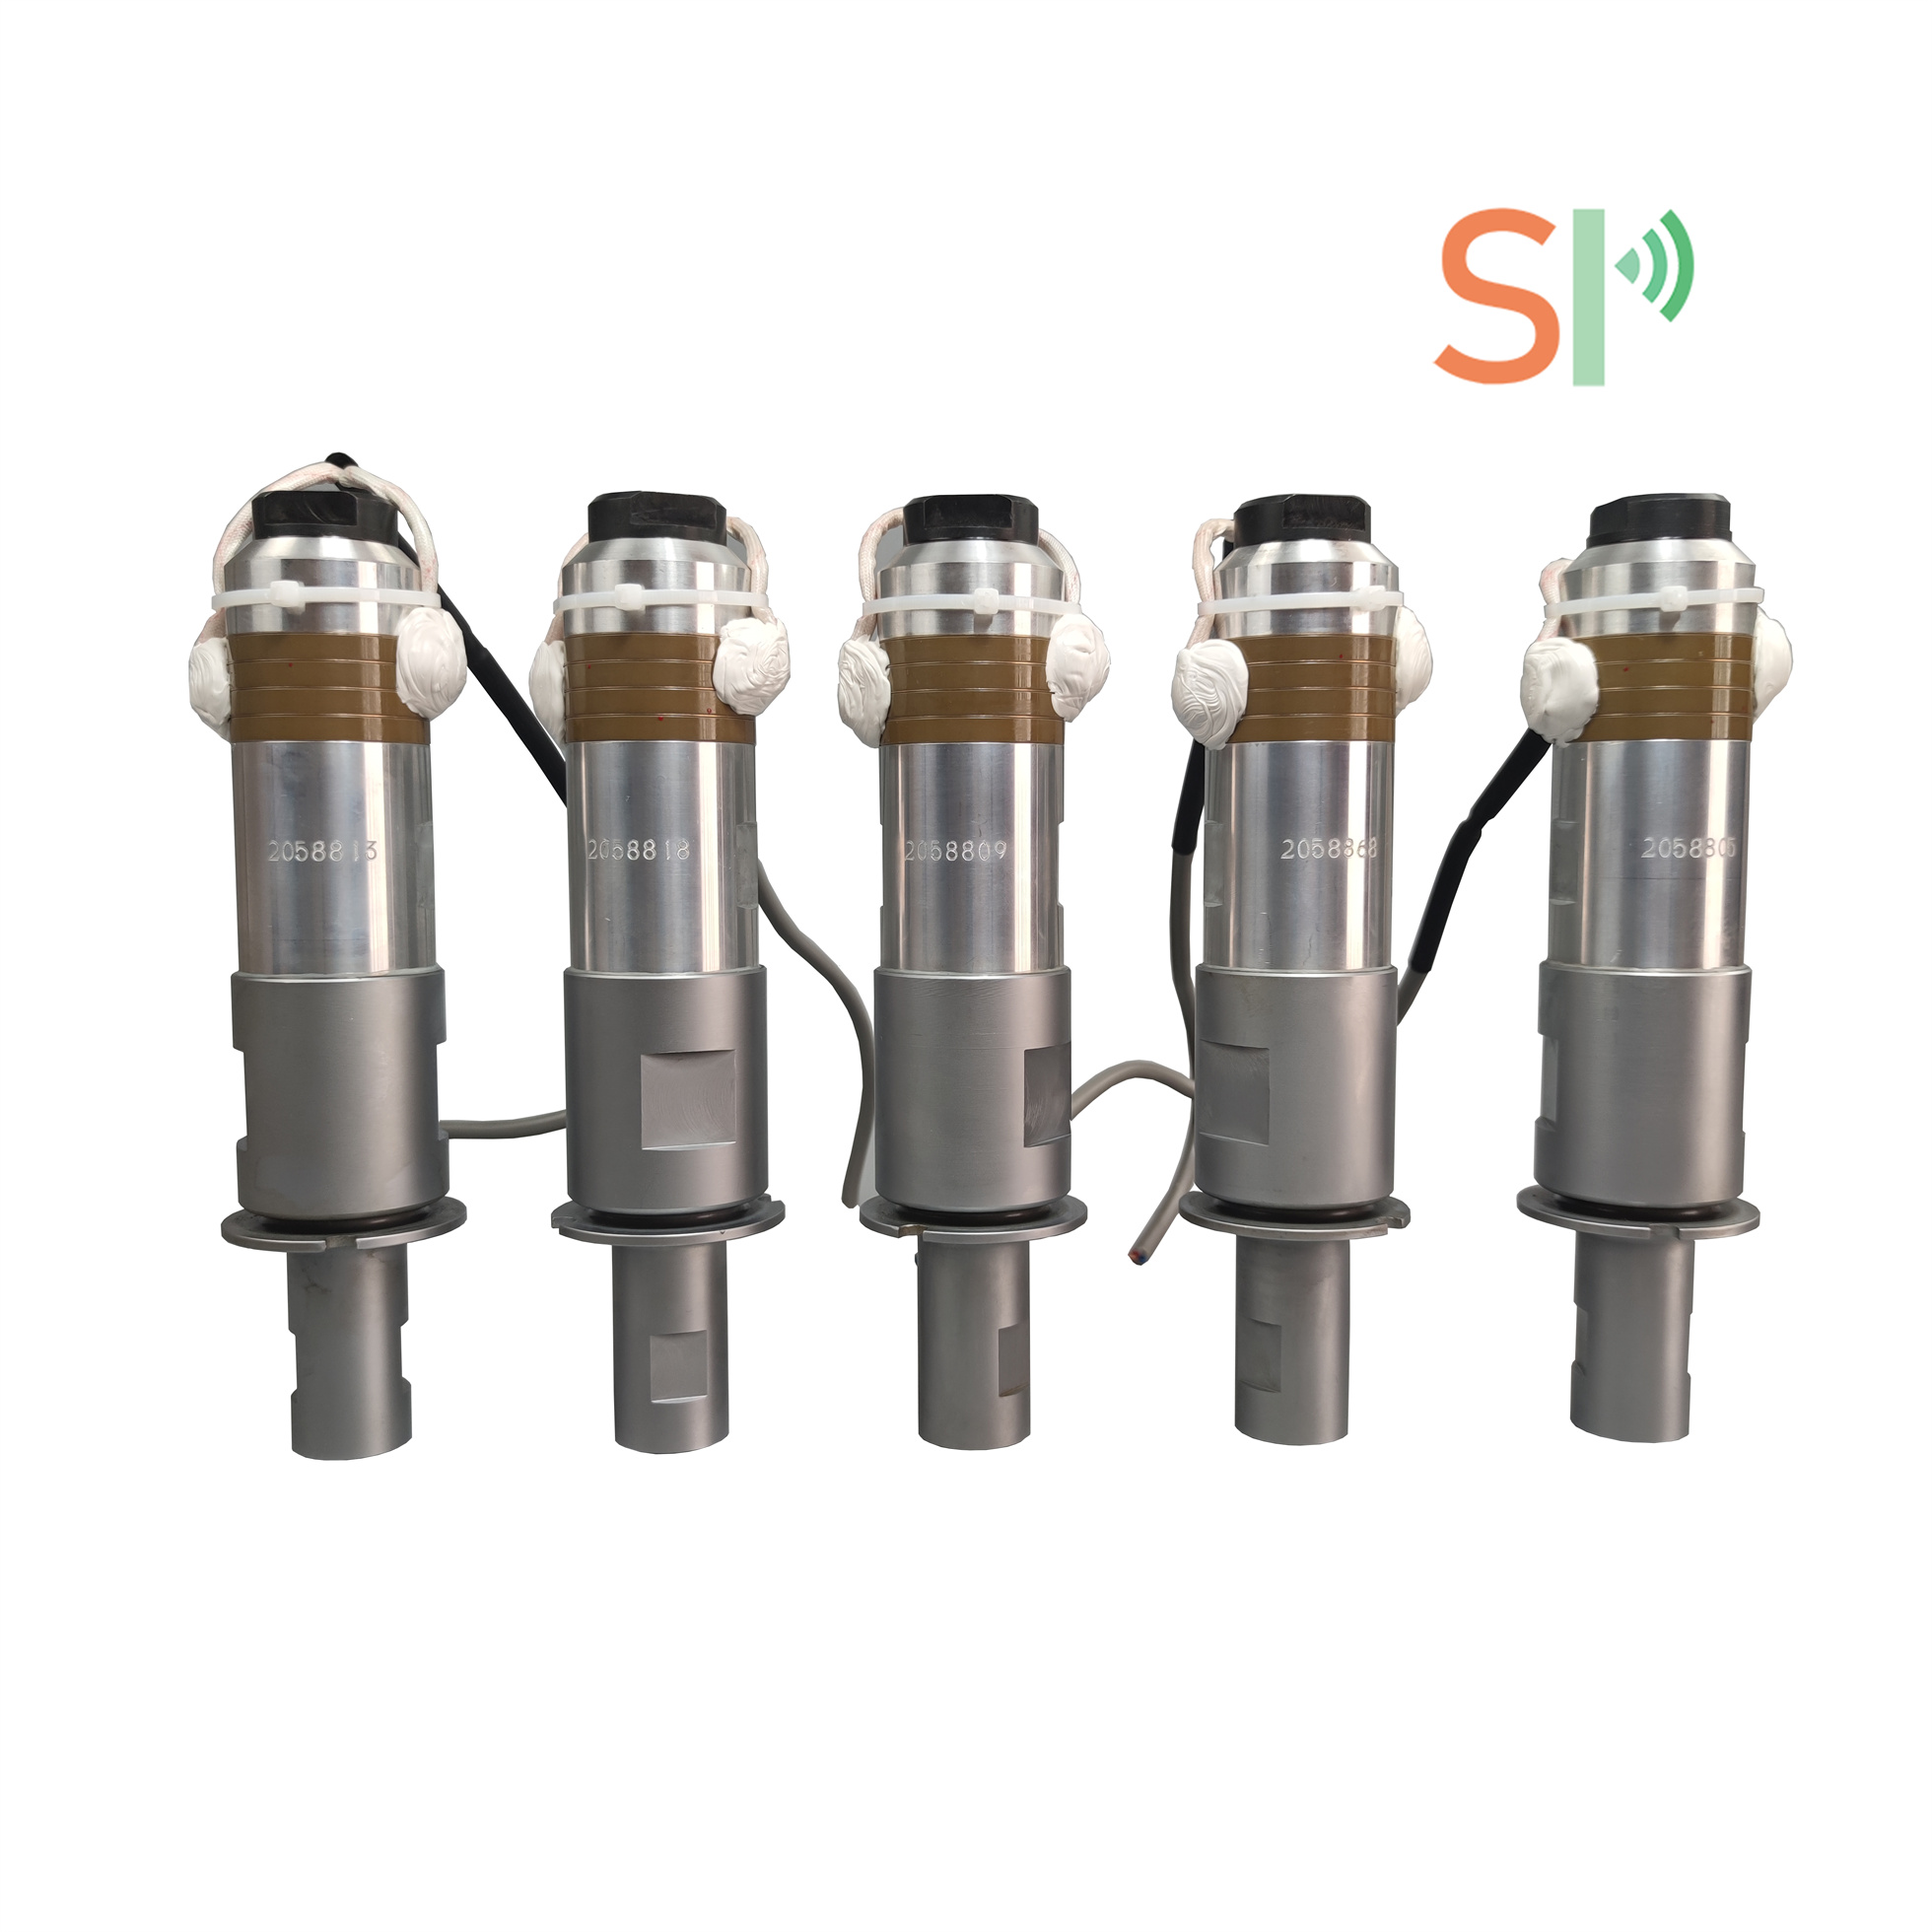 High Quality 20KHz Ultrasonic Welding Transducer With High Vabration